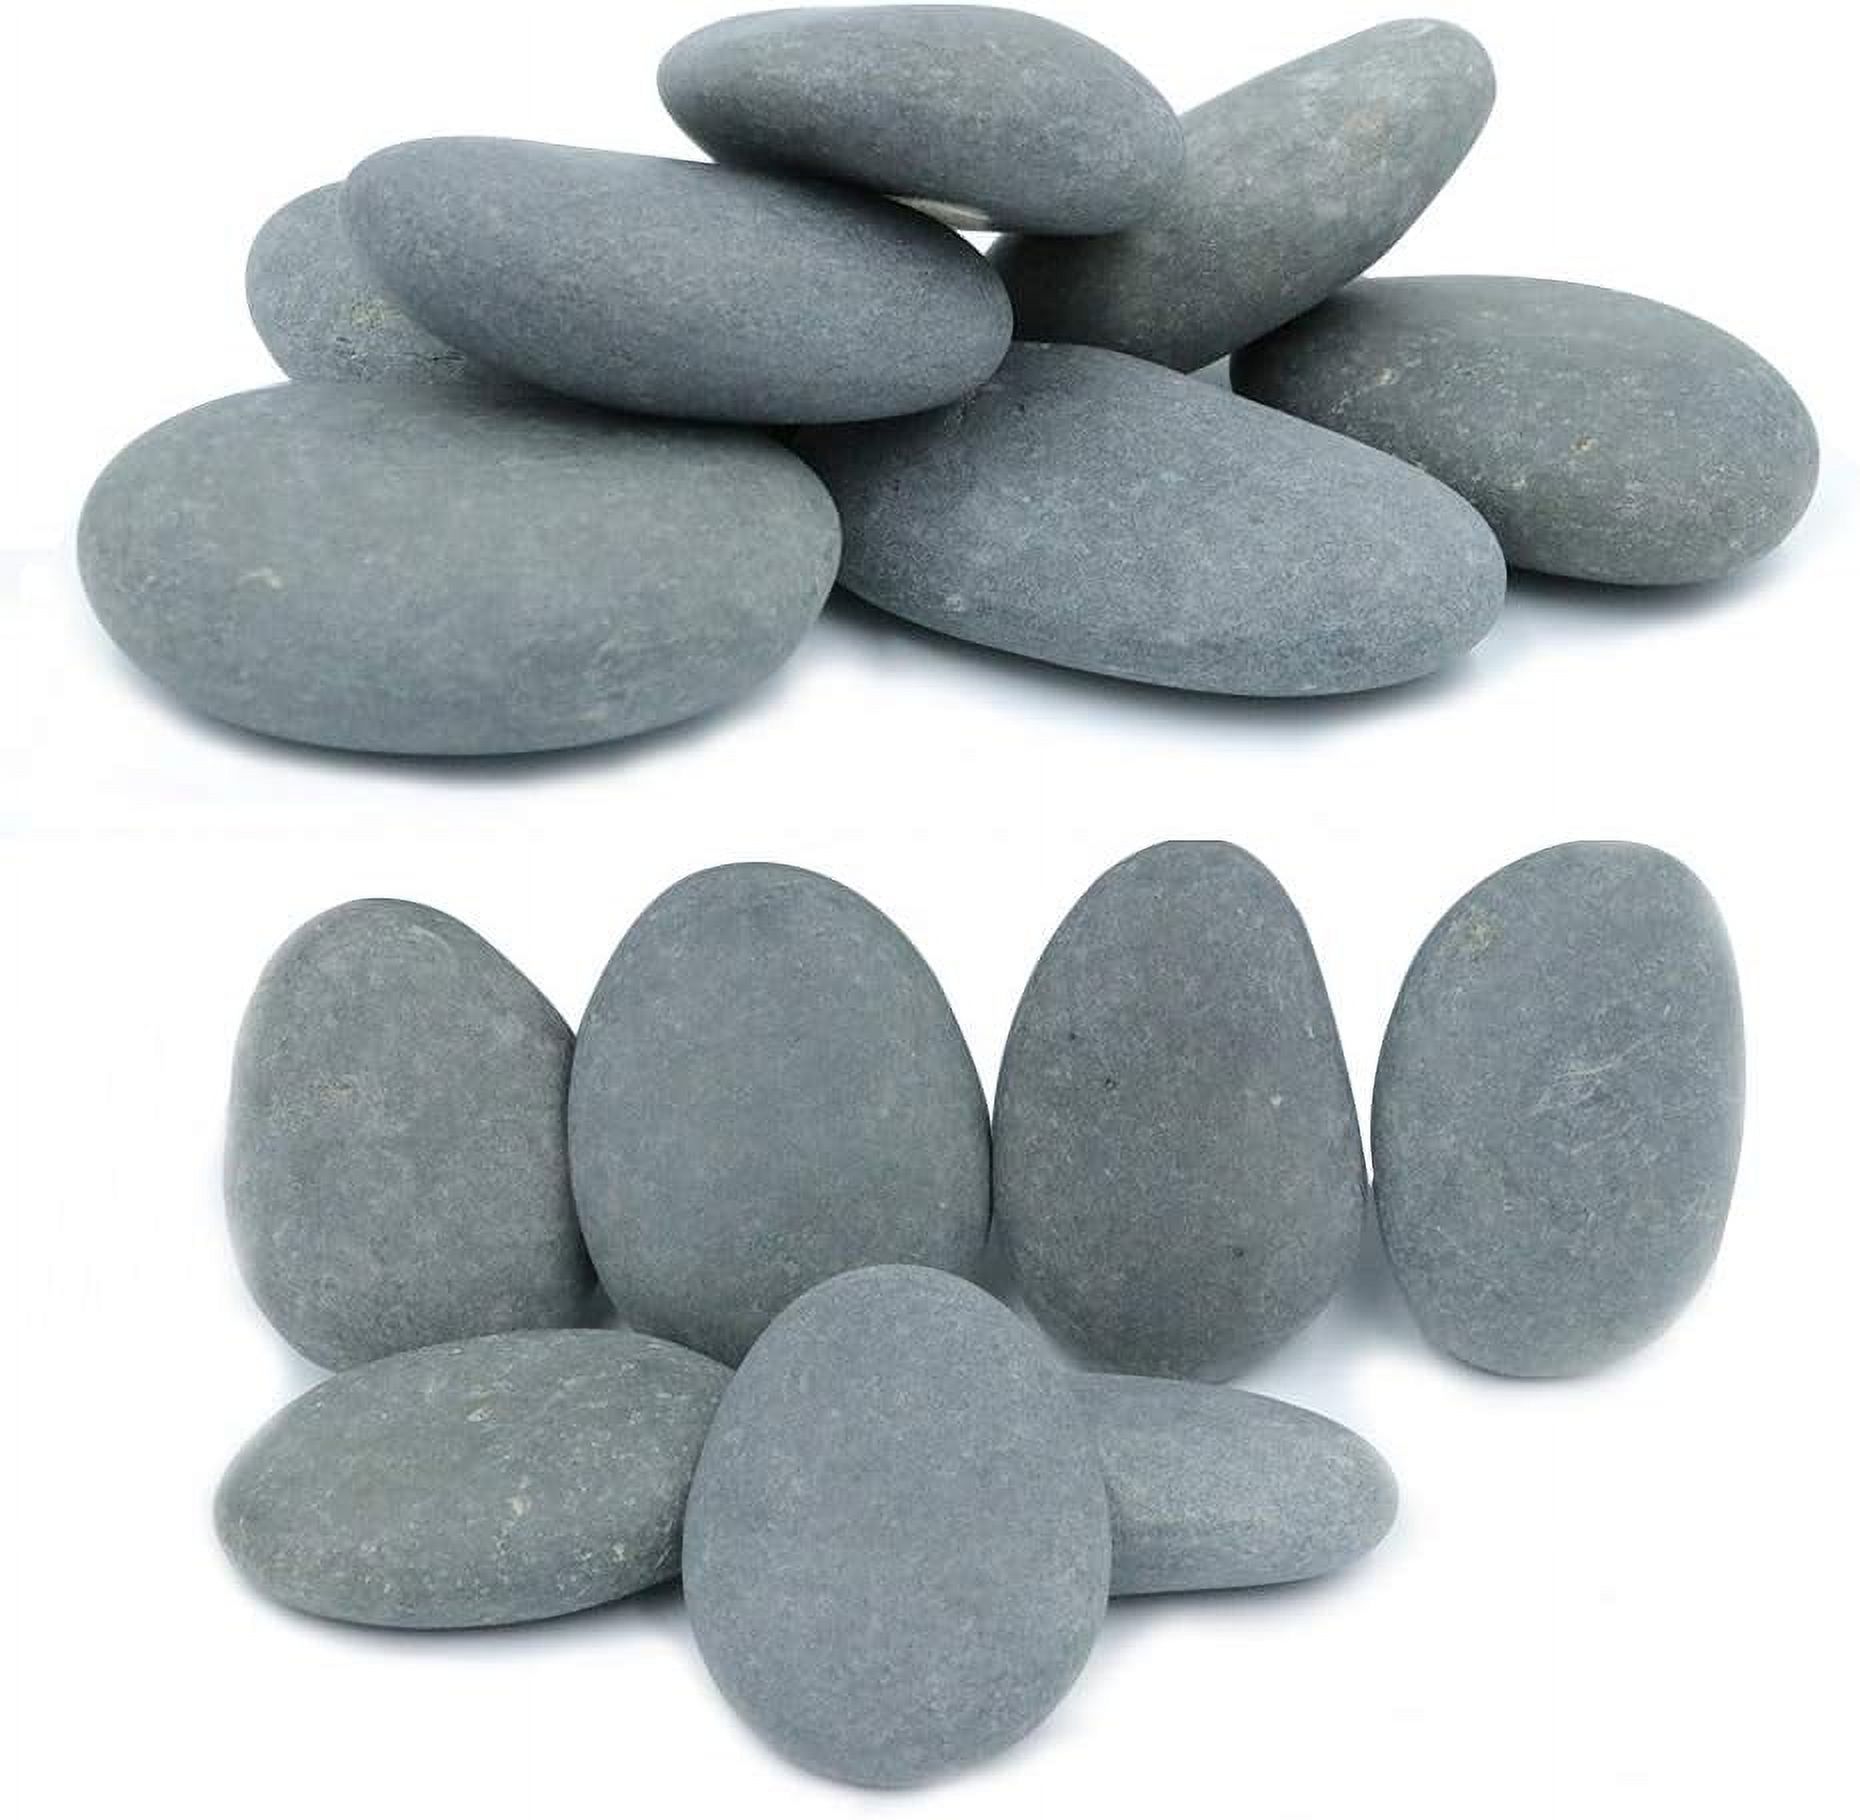 Koltose by Mash - Craft Rocks for Painting, 100% Natural River Stones,  2”-3.5” inch, Set of 14 